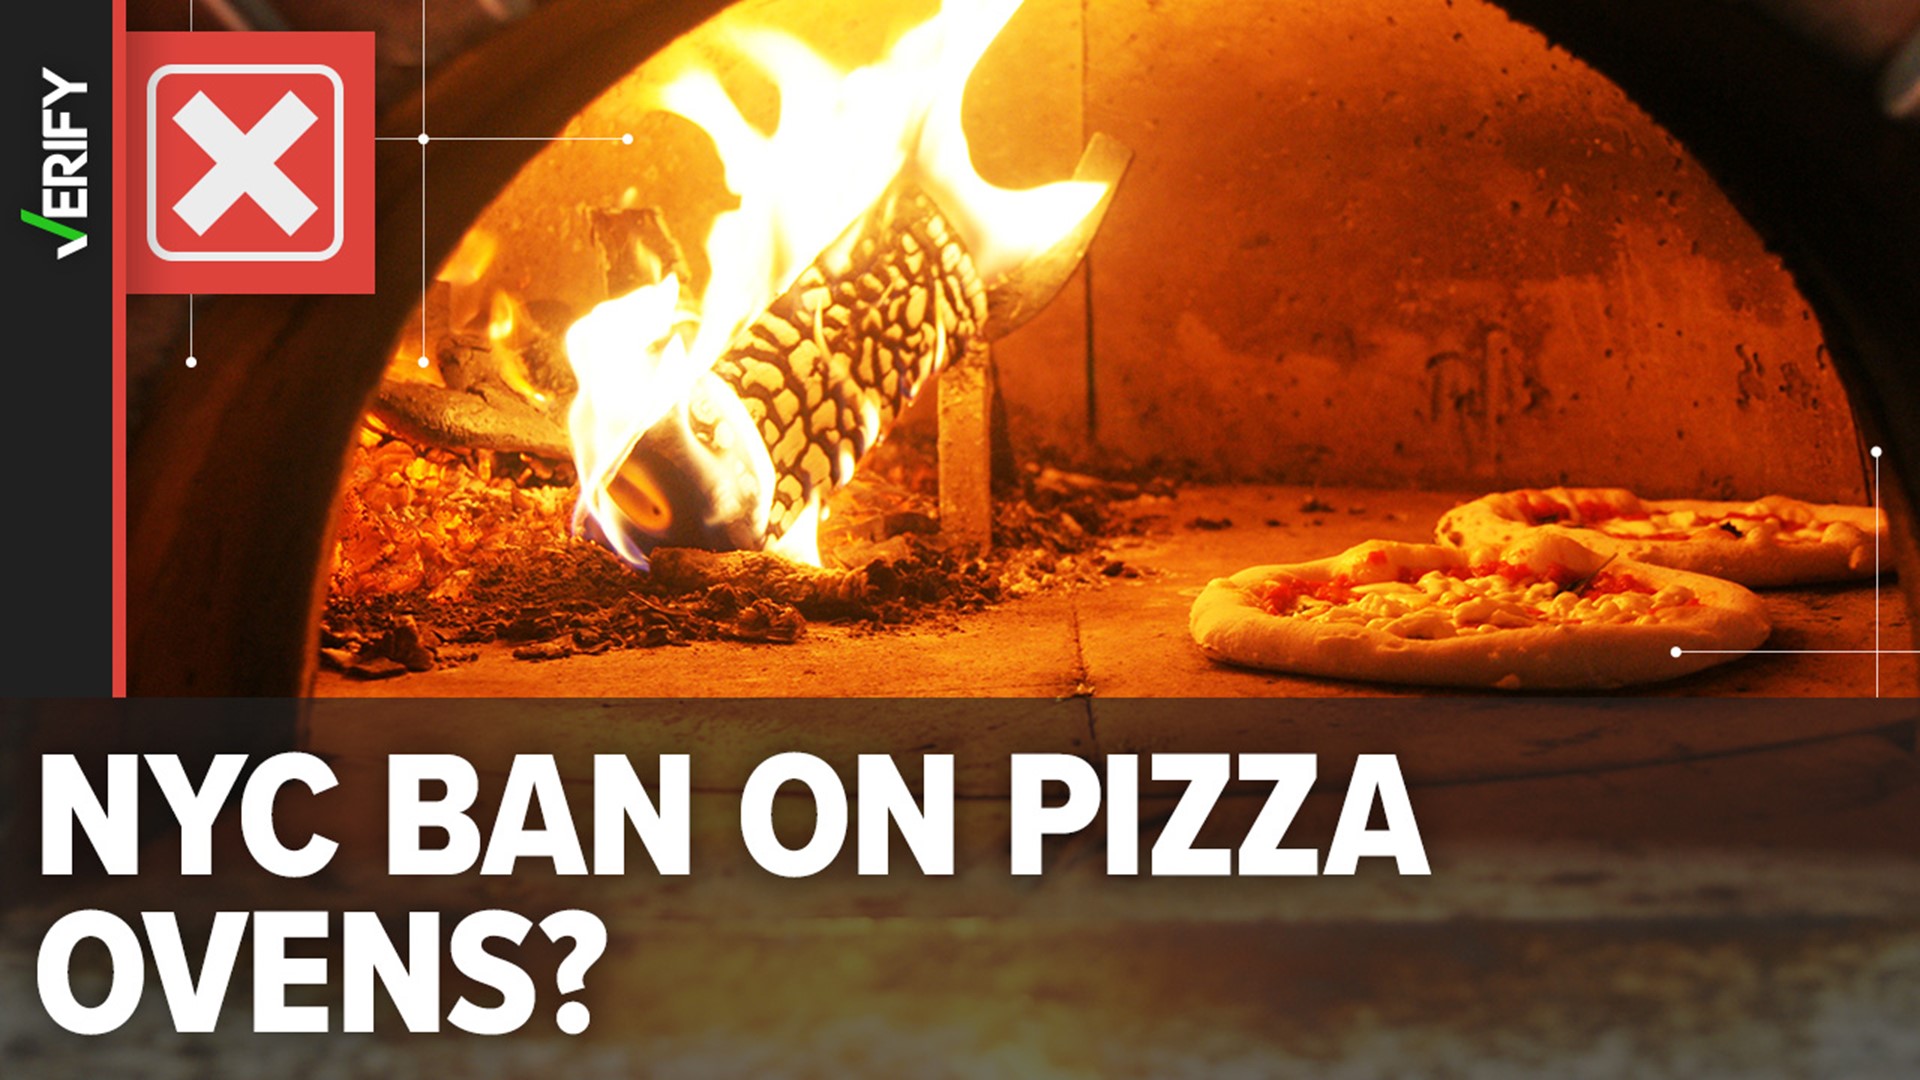 A proposed rule would require some NYC pizzerias to install a device that would reduce smoke and particulate matter emitted from coal or wood-fired pizza ovens.